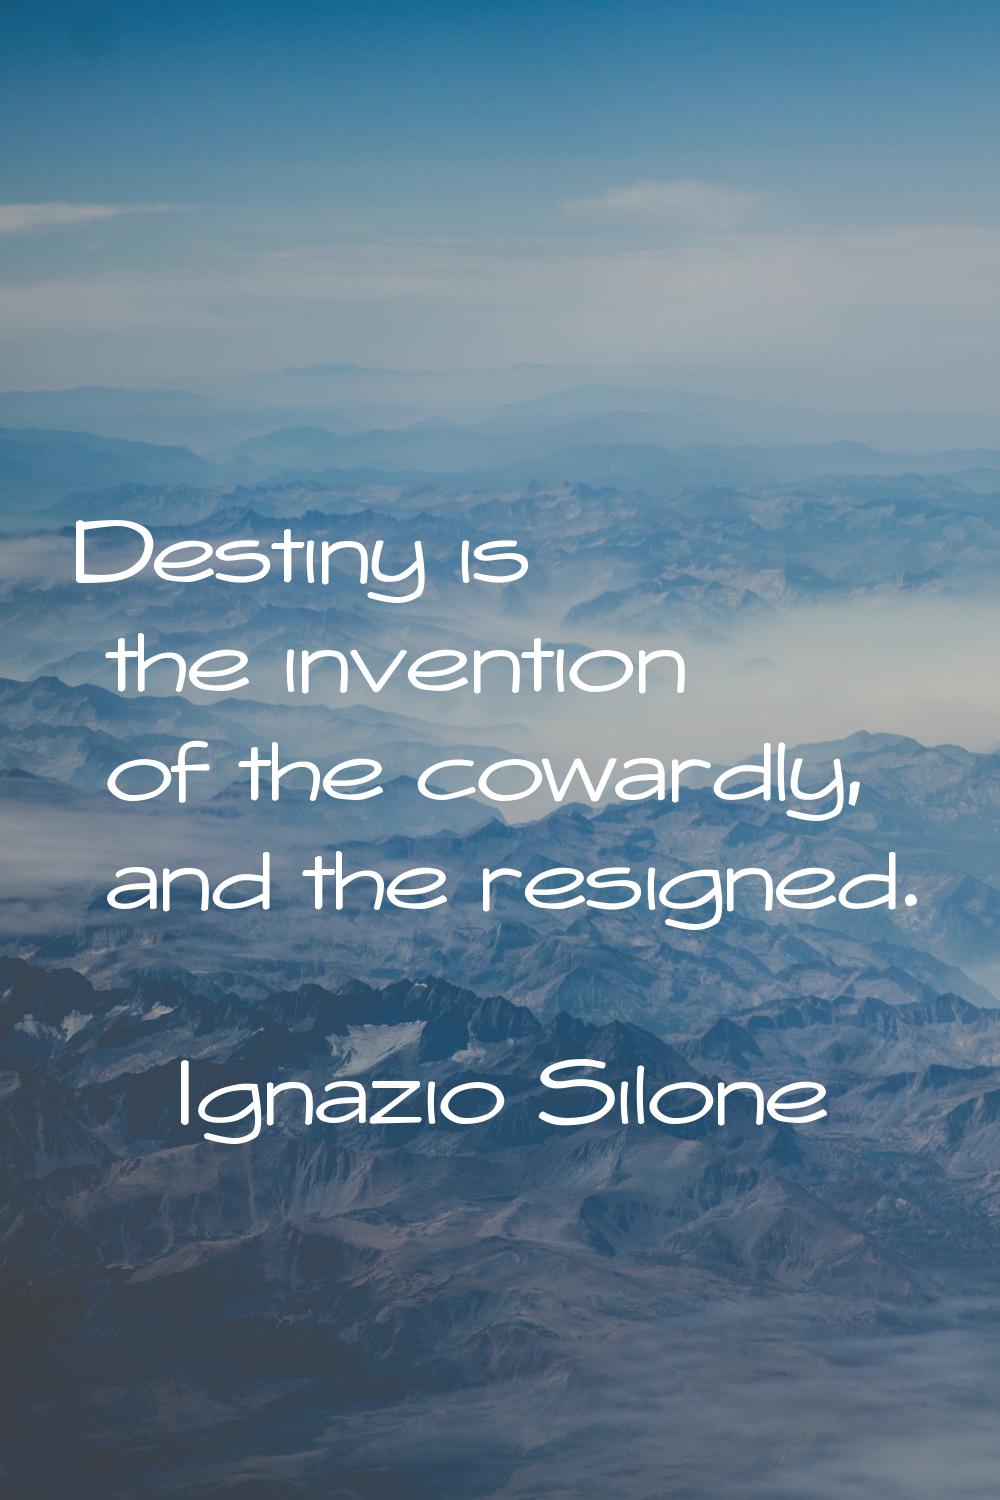 Destiny is the invention of the cowardly, and the resigned.